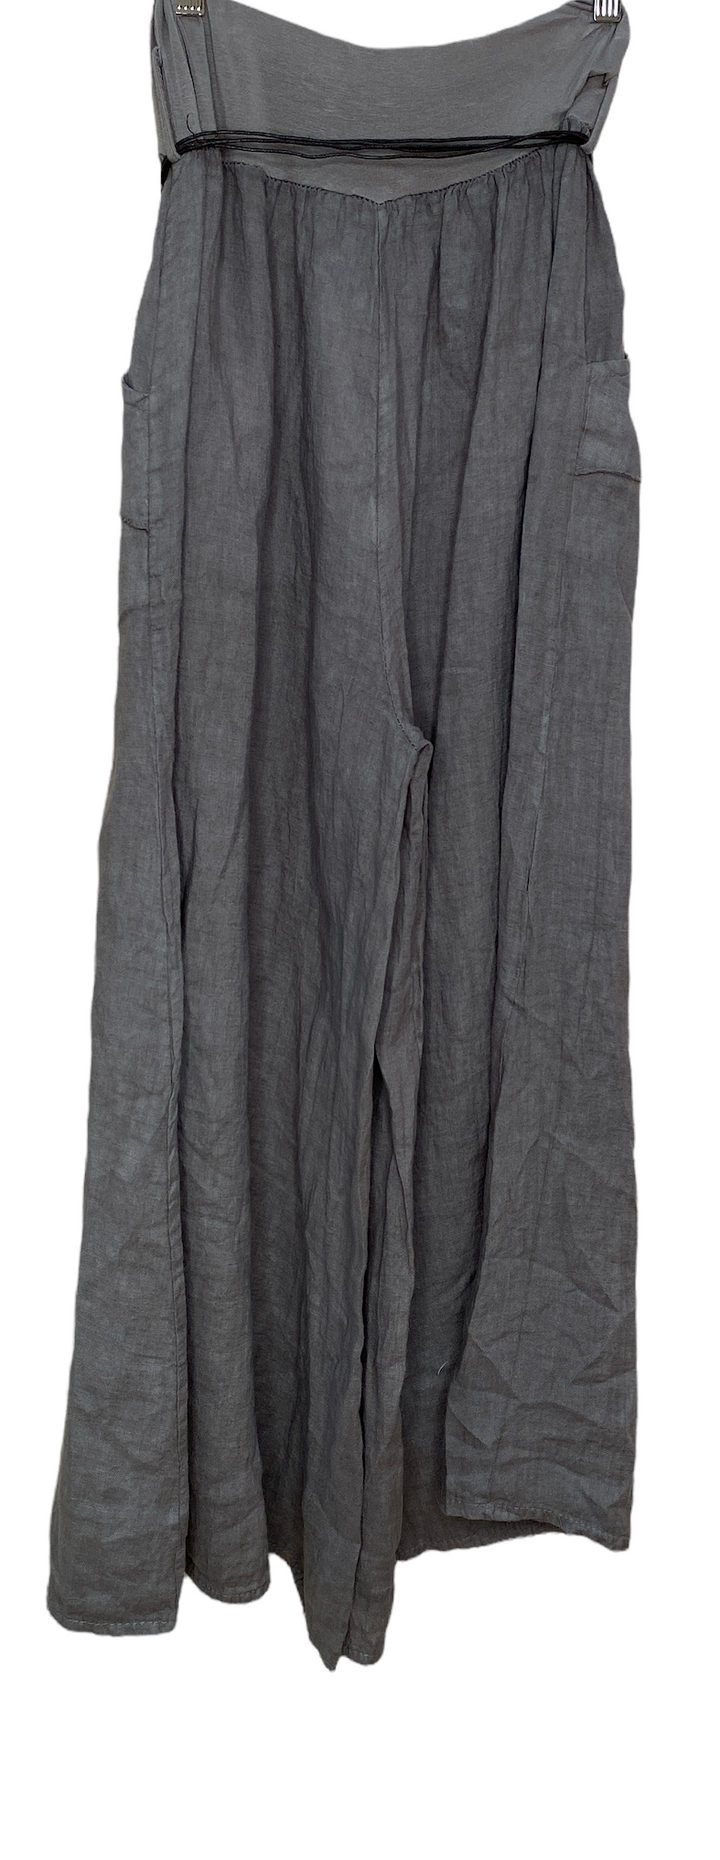 BELTED LINEN PALAZZO PANTS - GREY - Kingfisher Road - Online Boutique